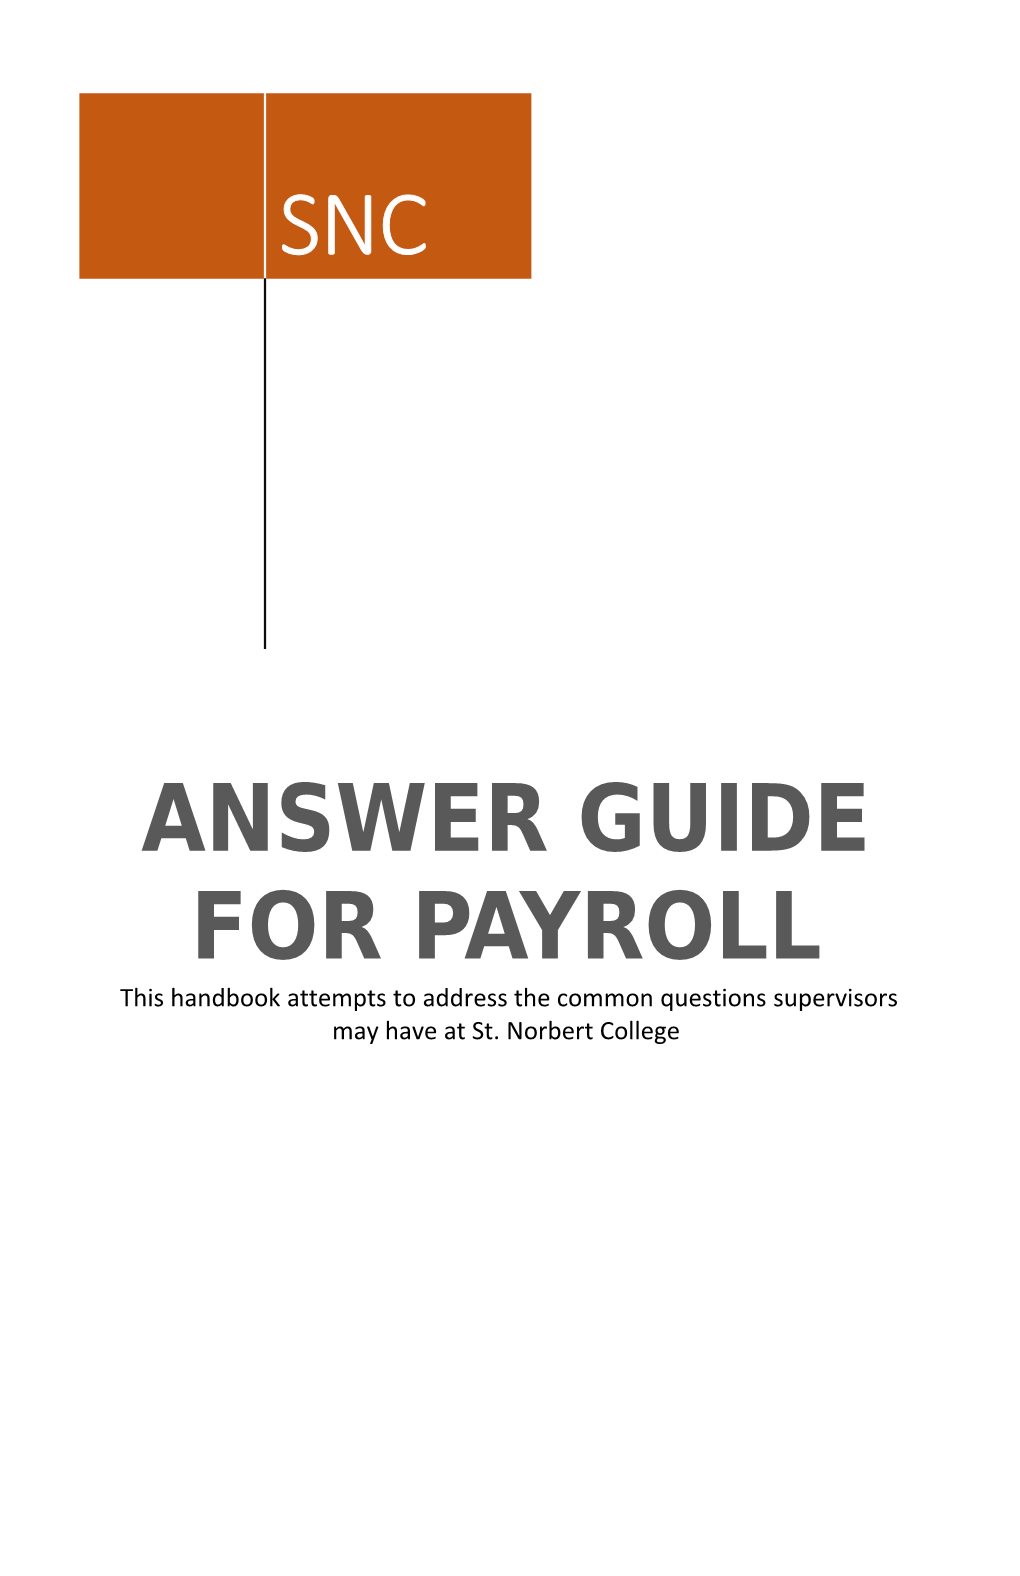 Answer Guide for Payroll